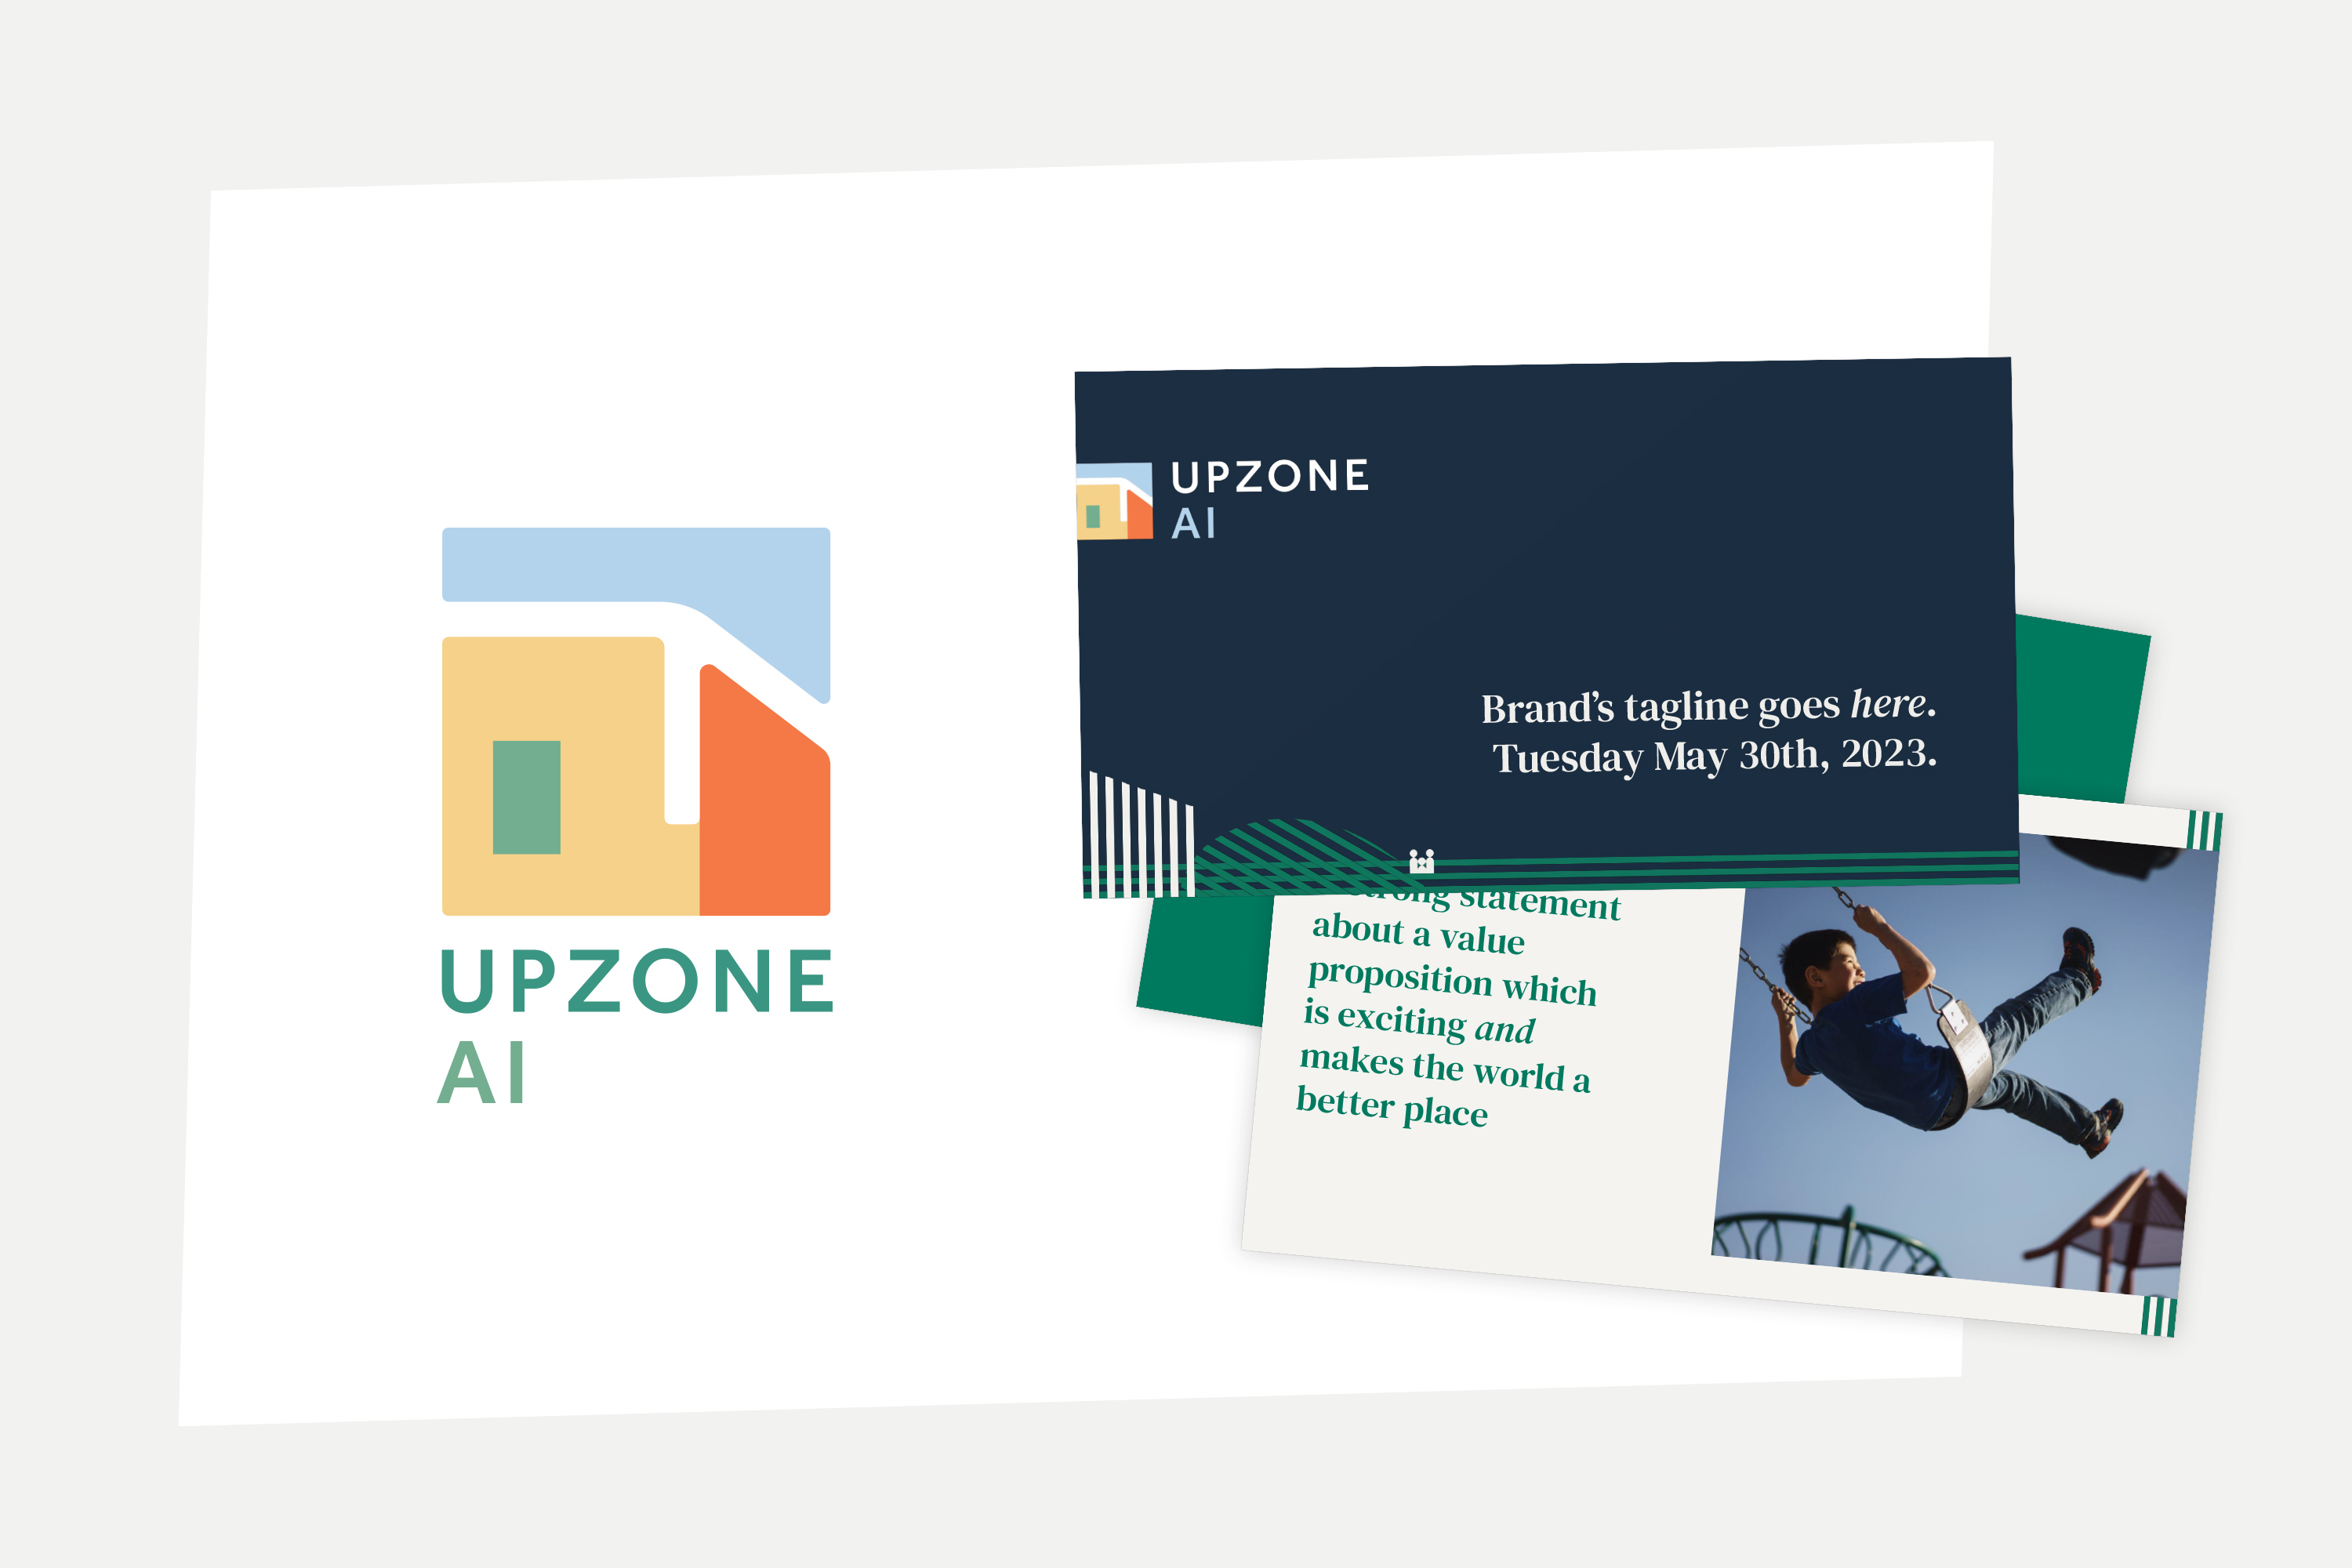 A logo reads 'Upzone AI' with an icon of a GIS map, and some startup pitch deck slides